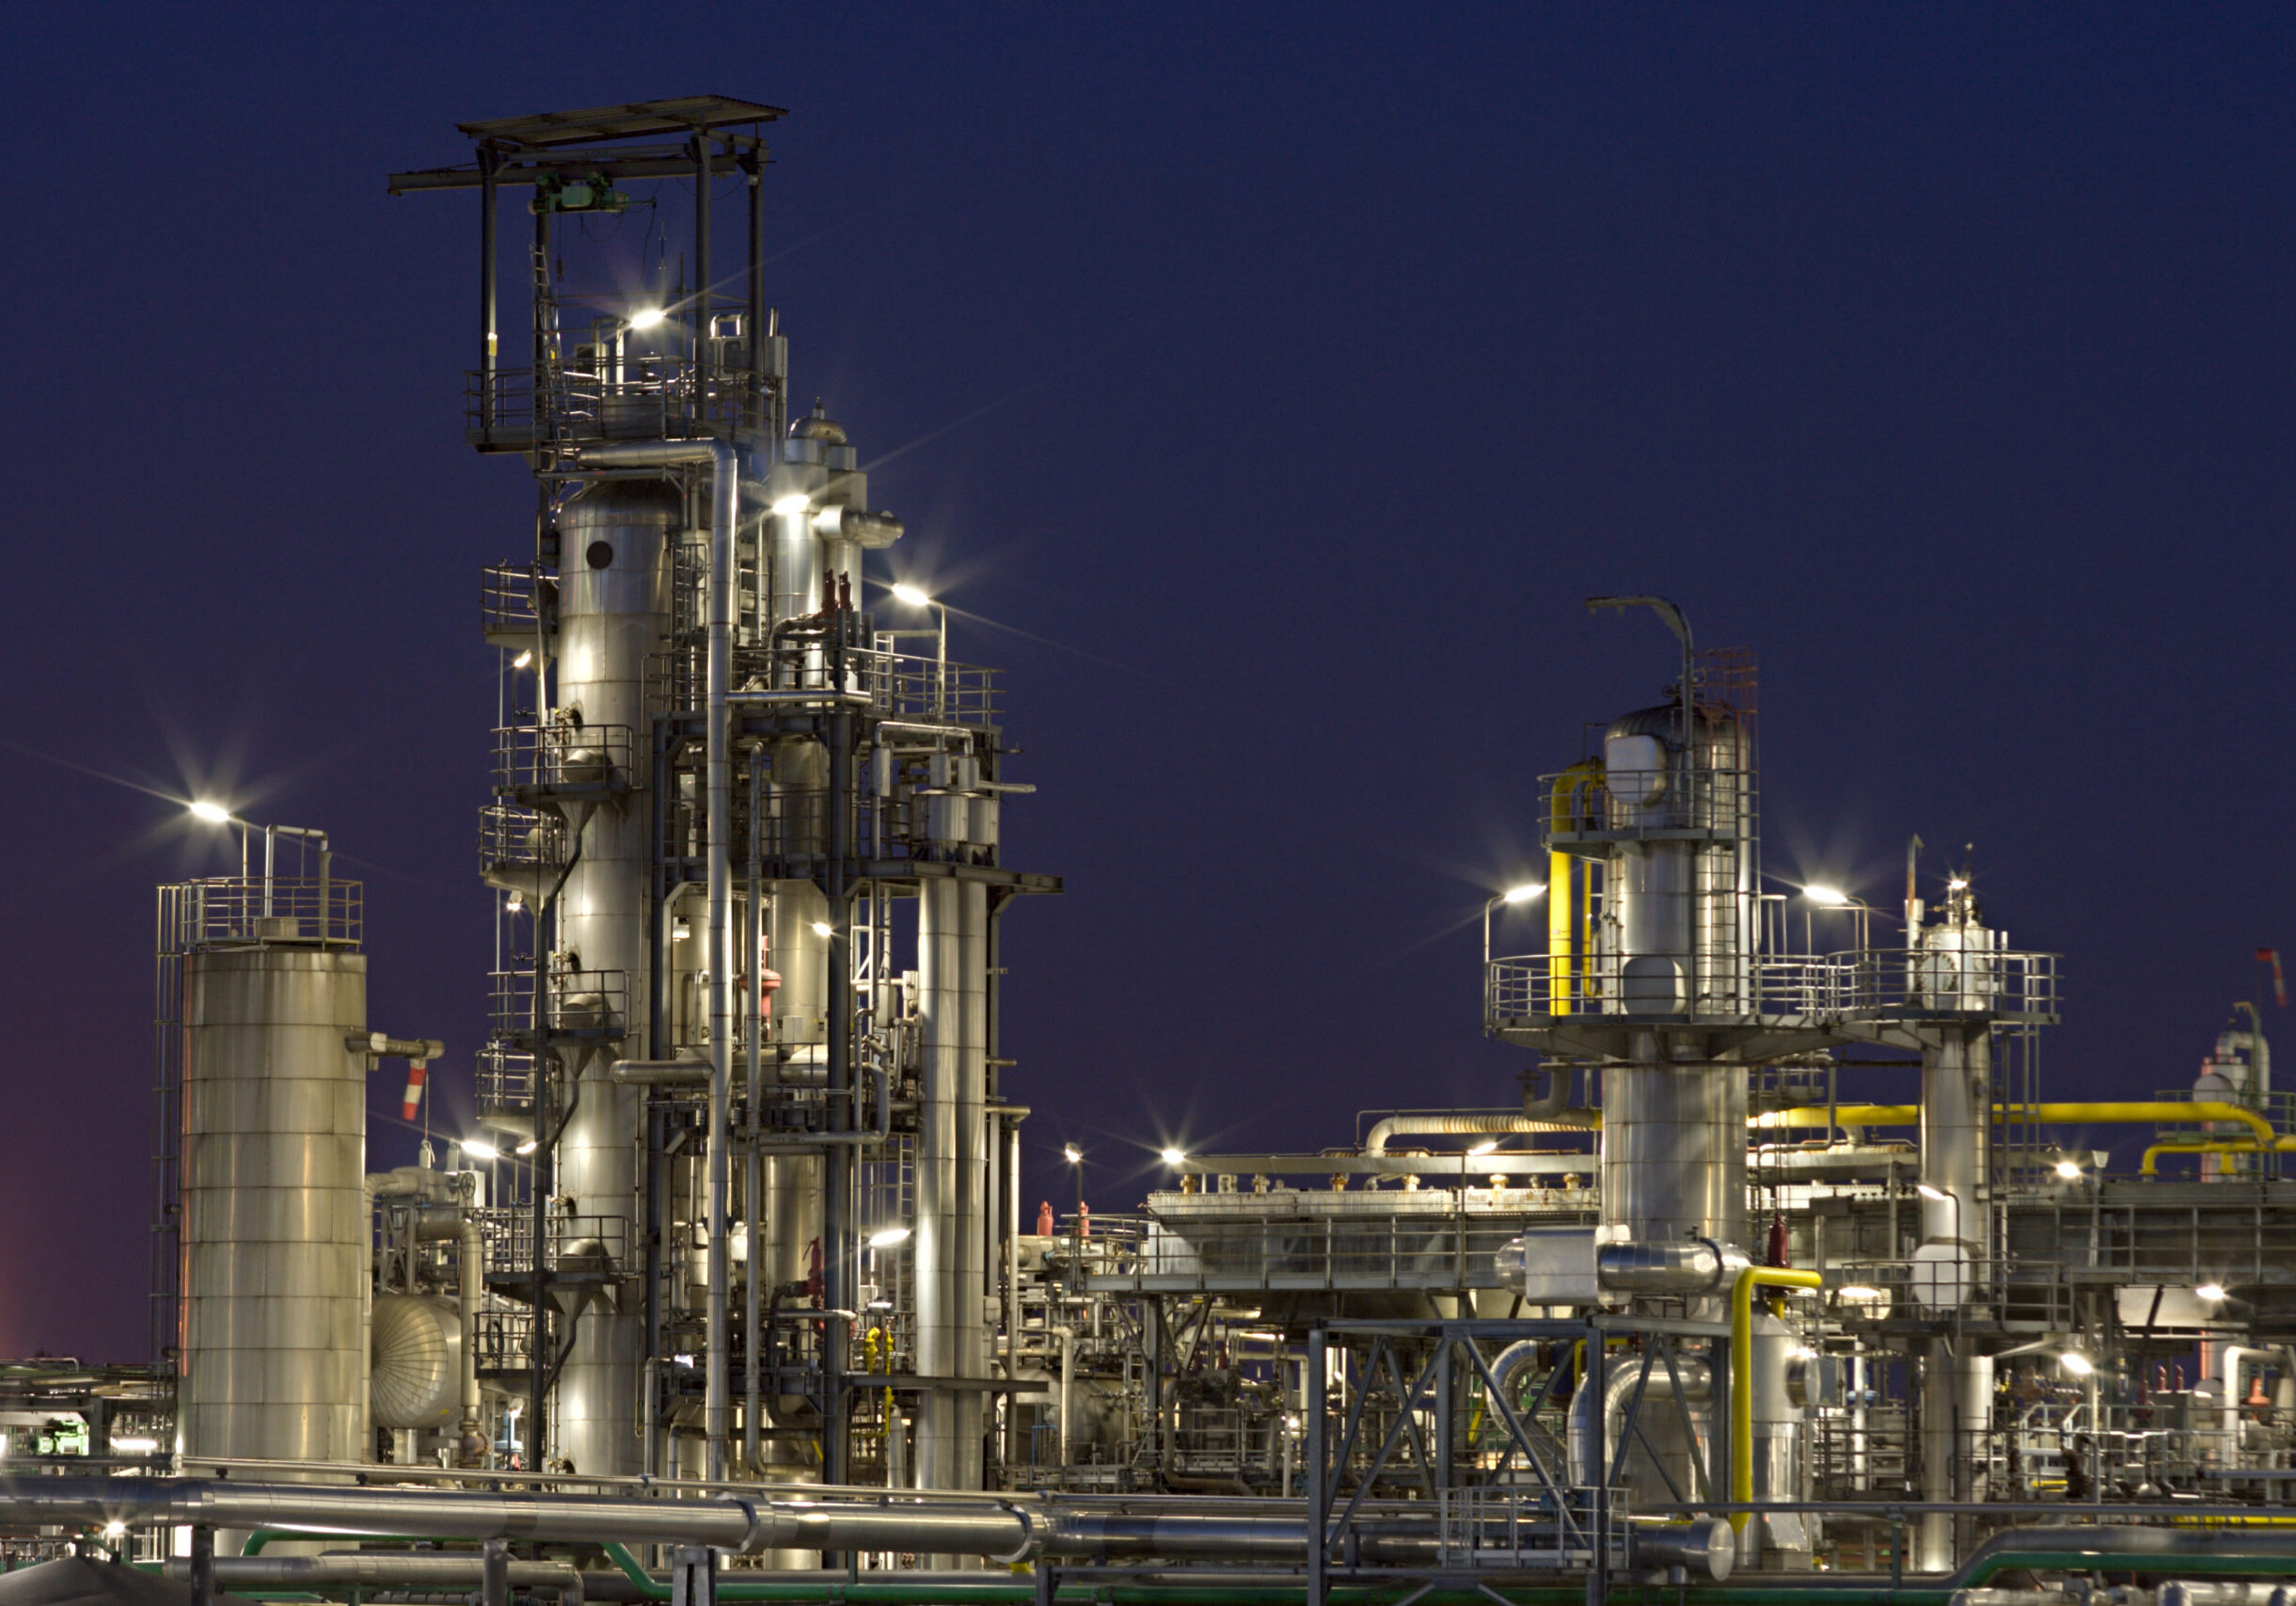 Part,Of,A,Chemical,Plant,And,Refinery,With,Night-blue,Sky.